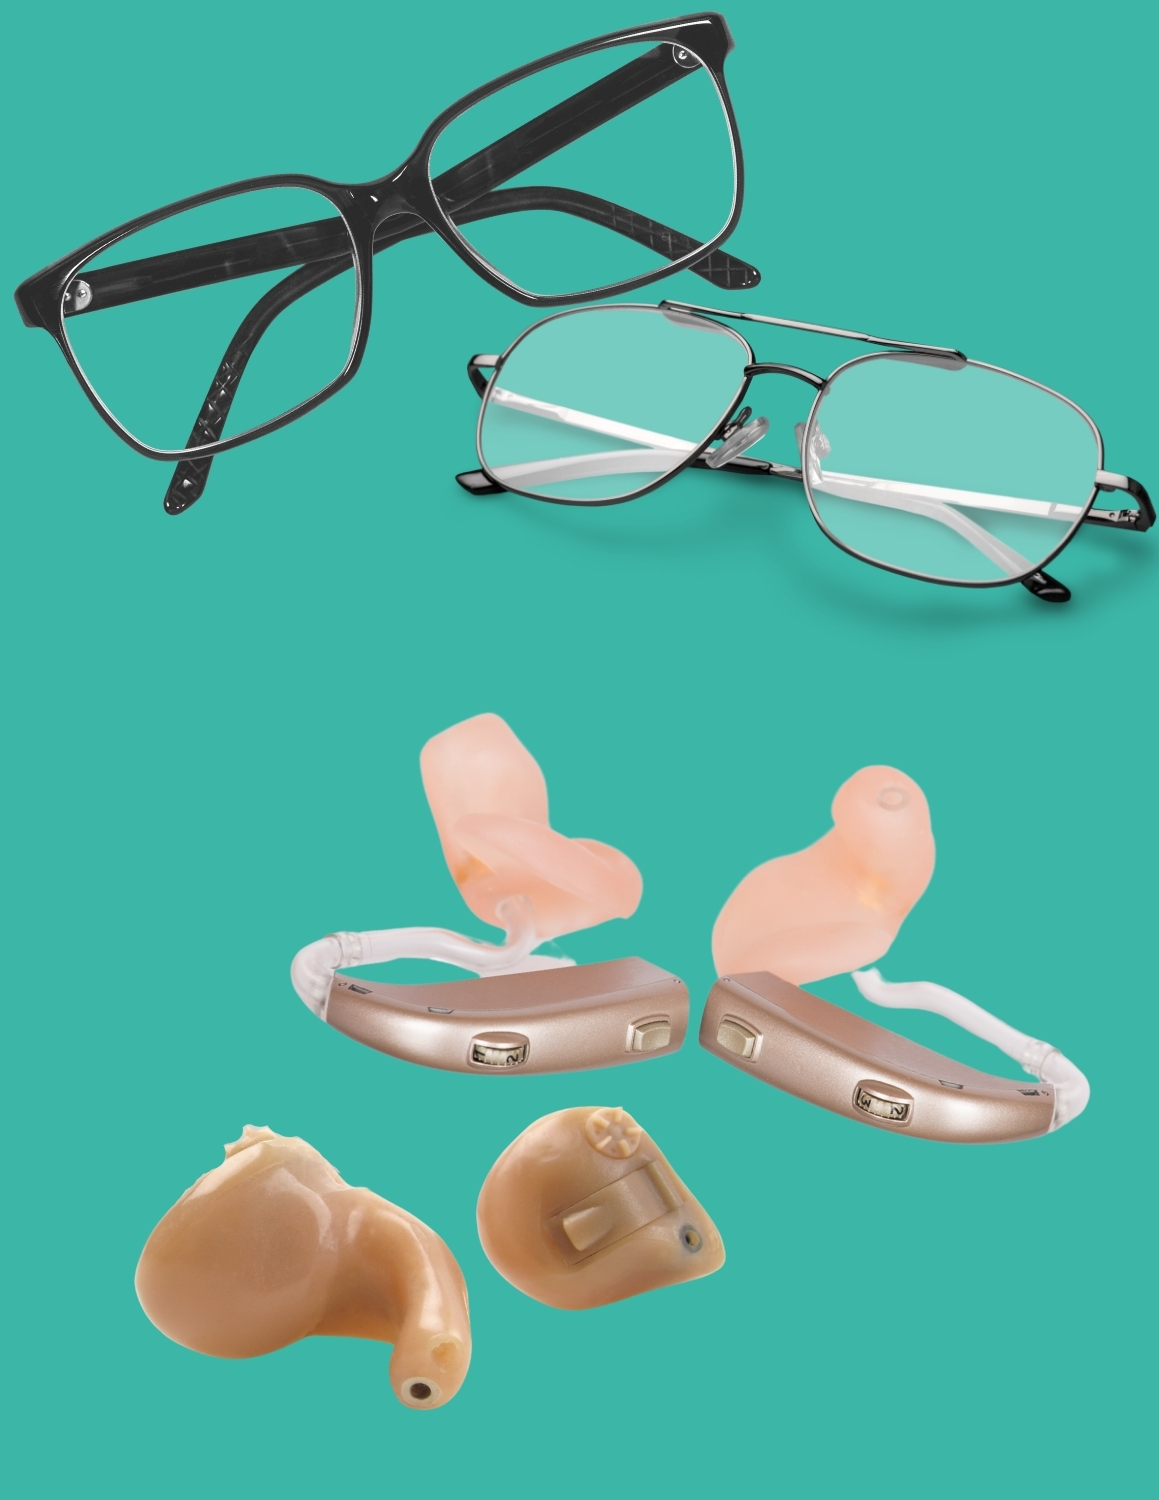 Digital image with two pairs of eyeglasses and two sets of hearing aids